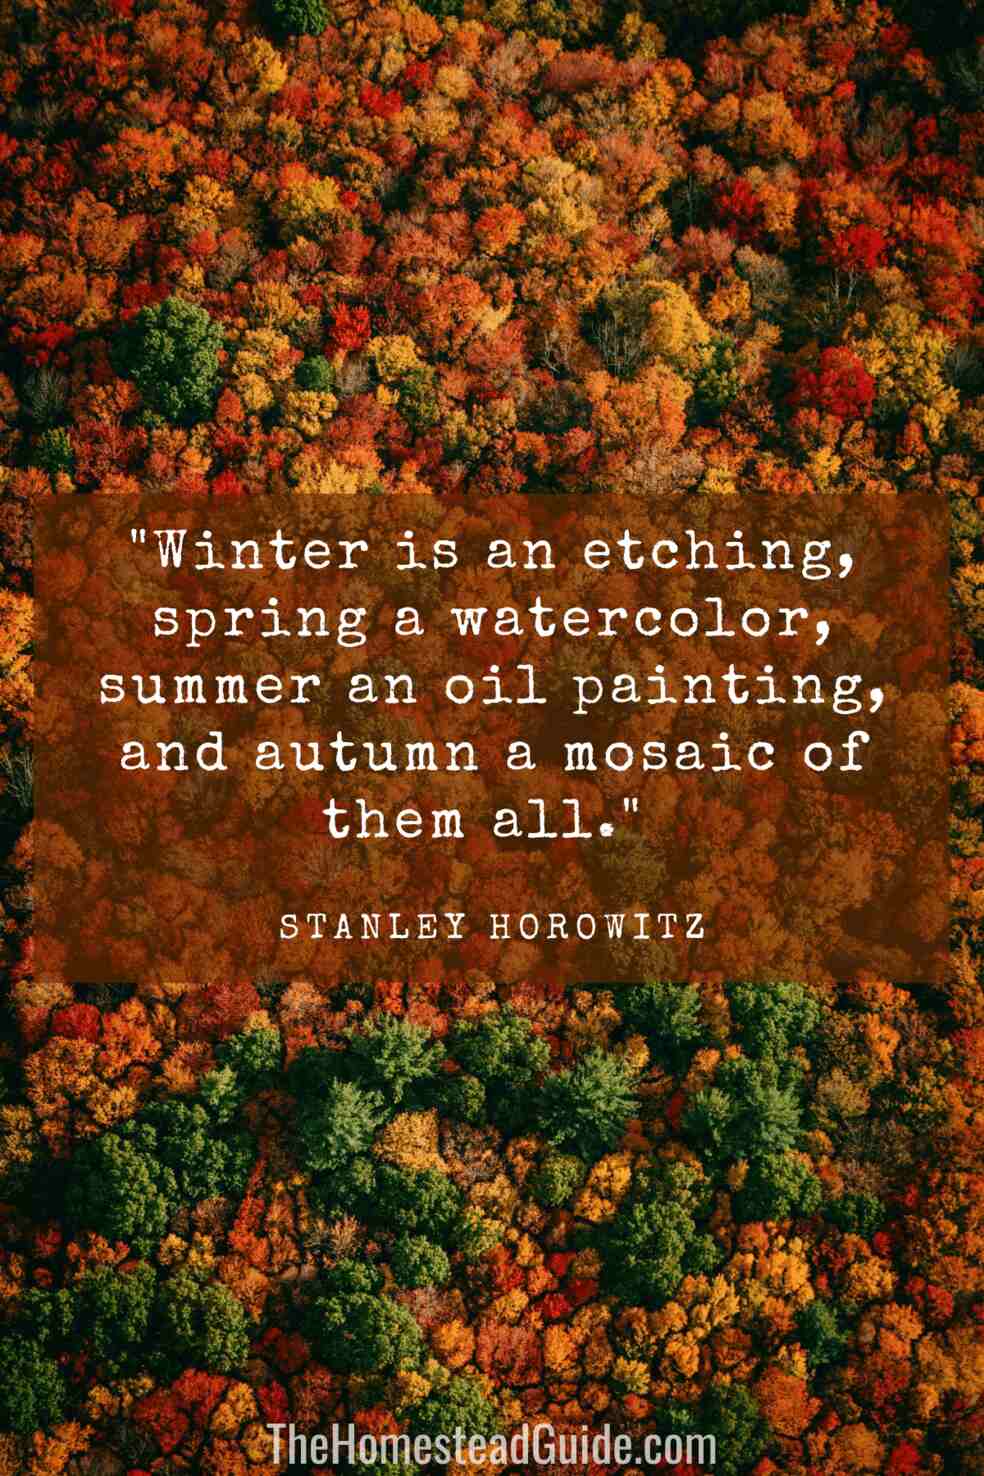 Winter is an etching, spring a watercolor, summer an oil painting, and autumn a mosaic of them all.